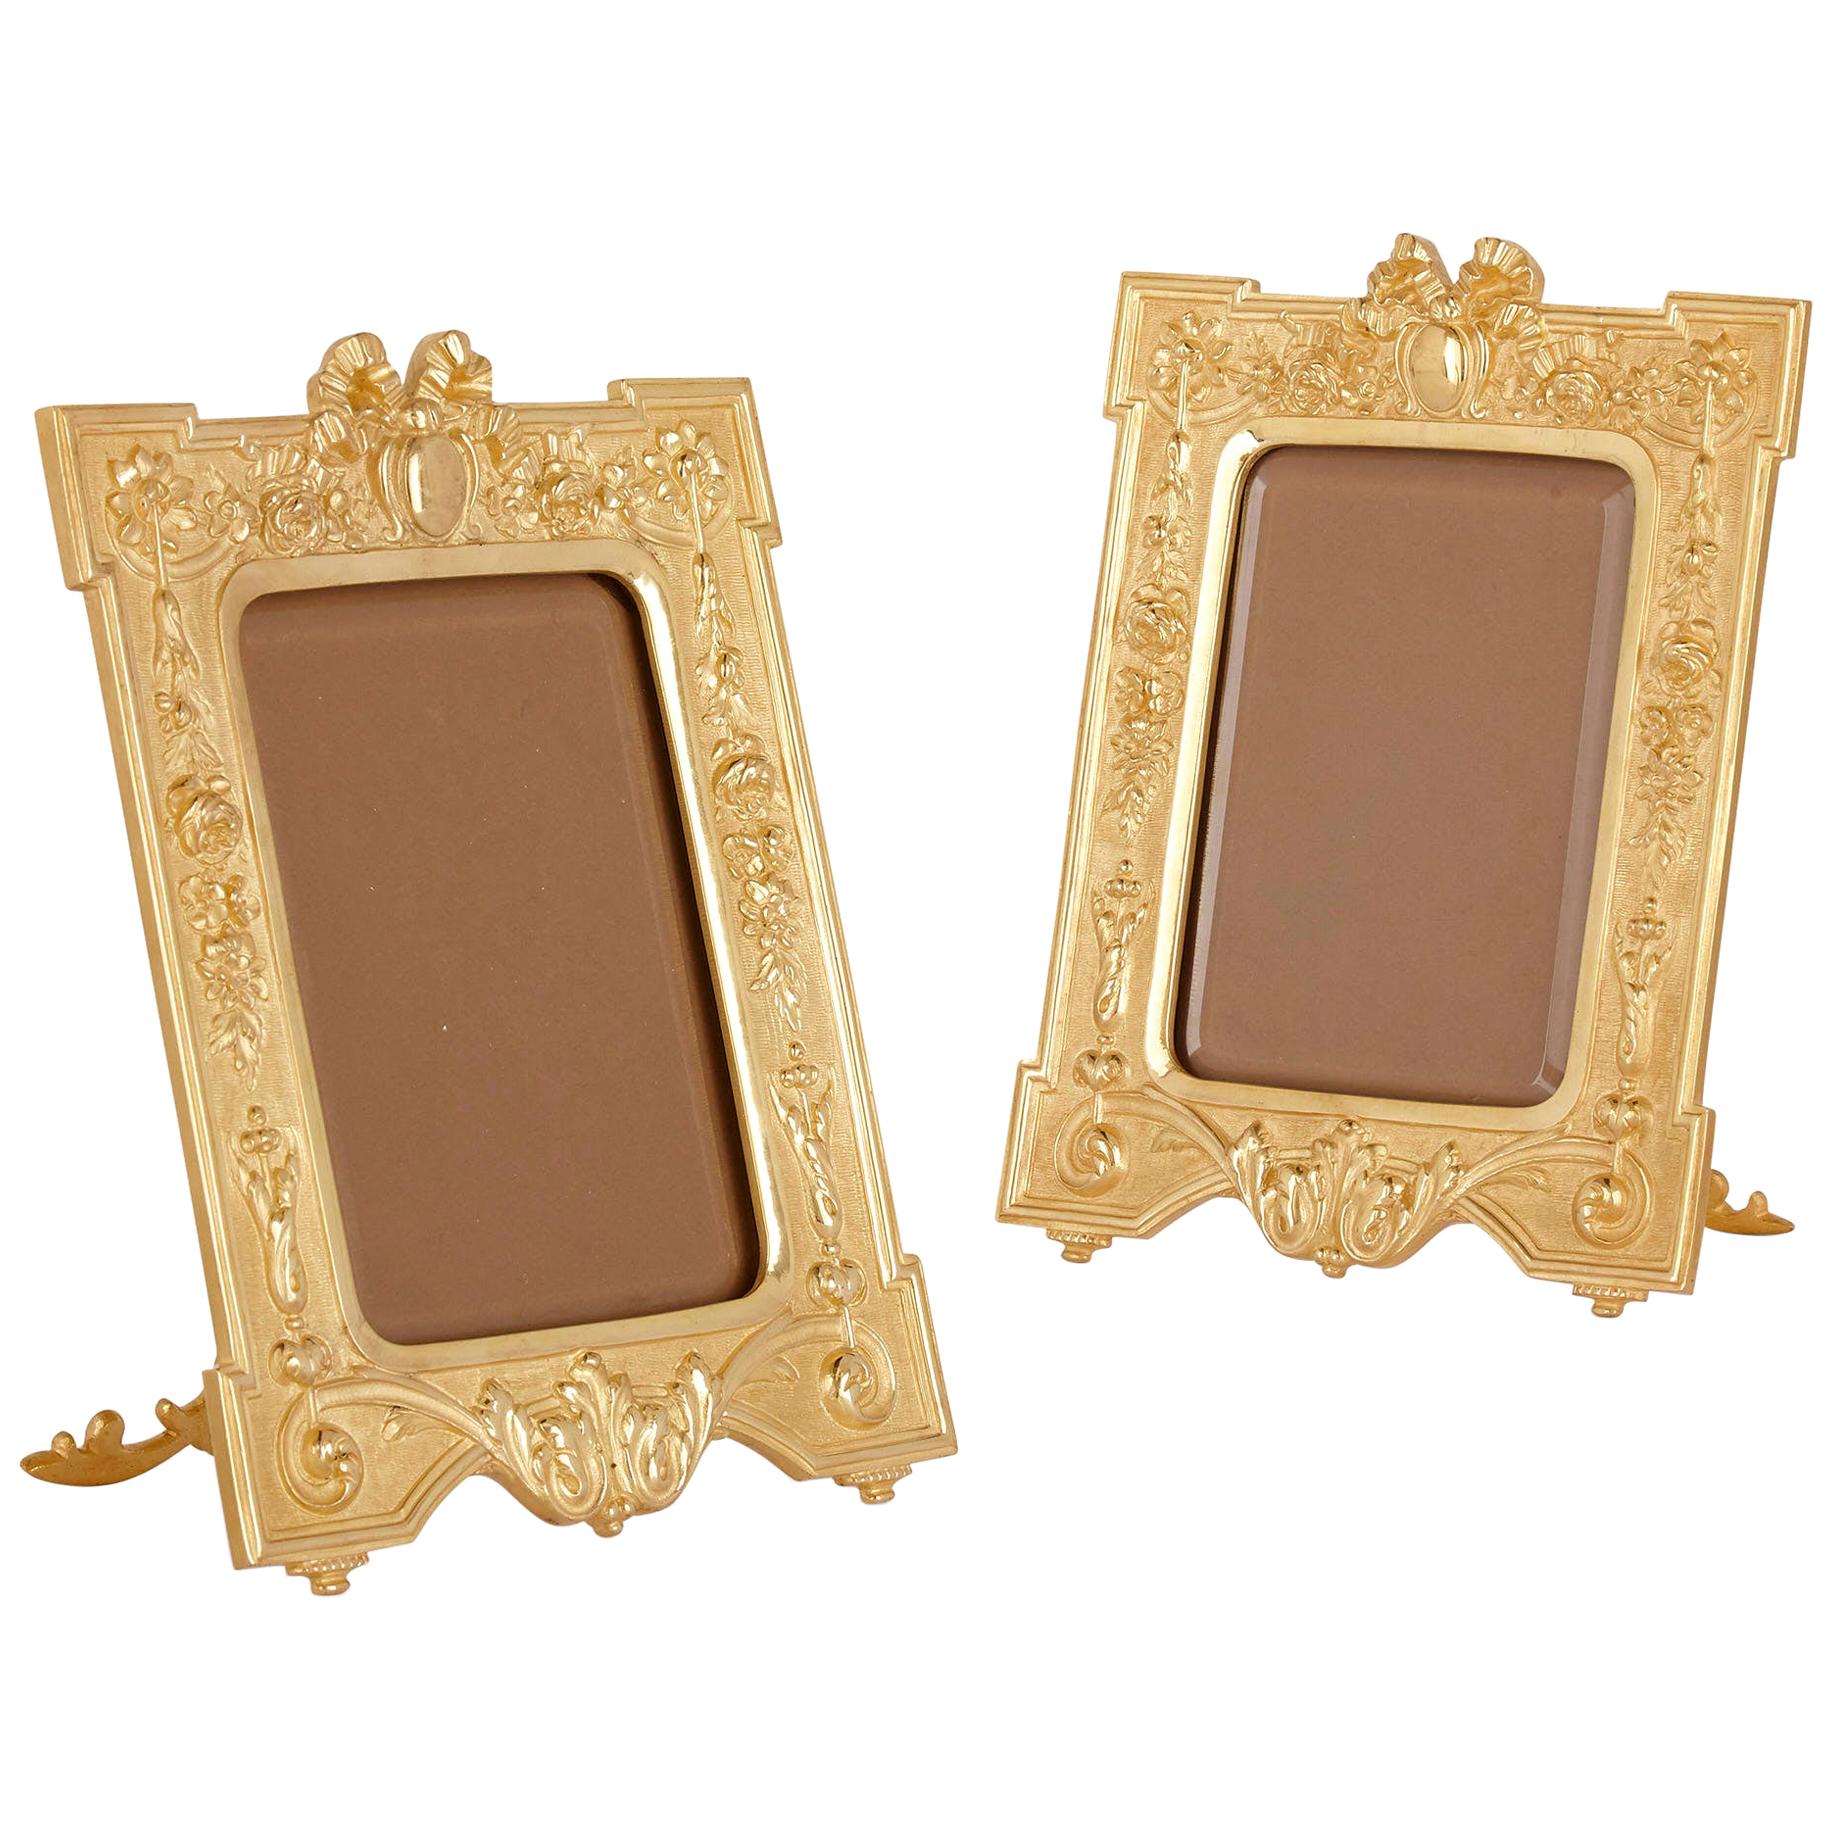 Pair of French Gilt Bronze Photograph Frames in the Neoclassical Style